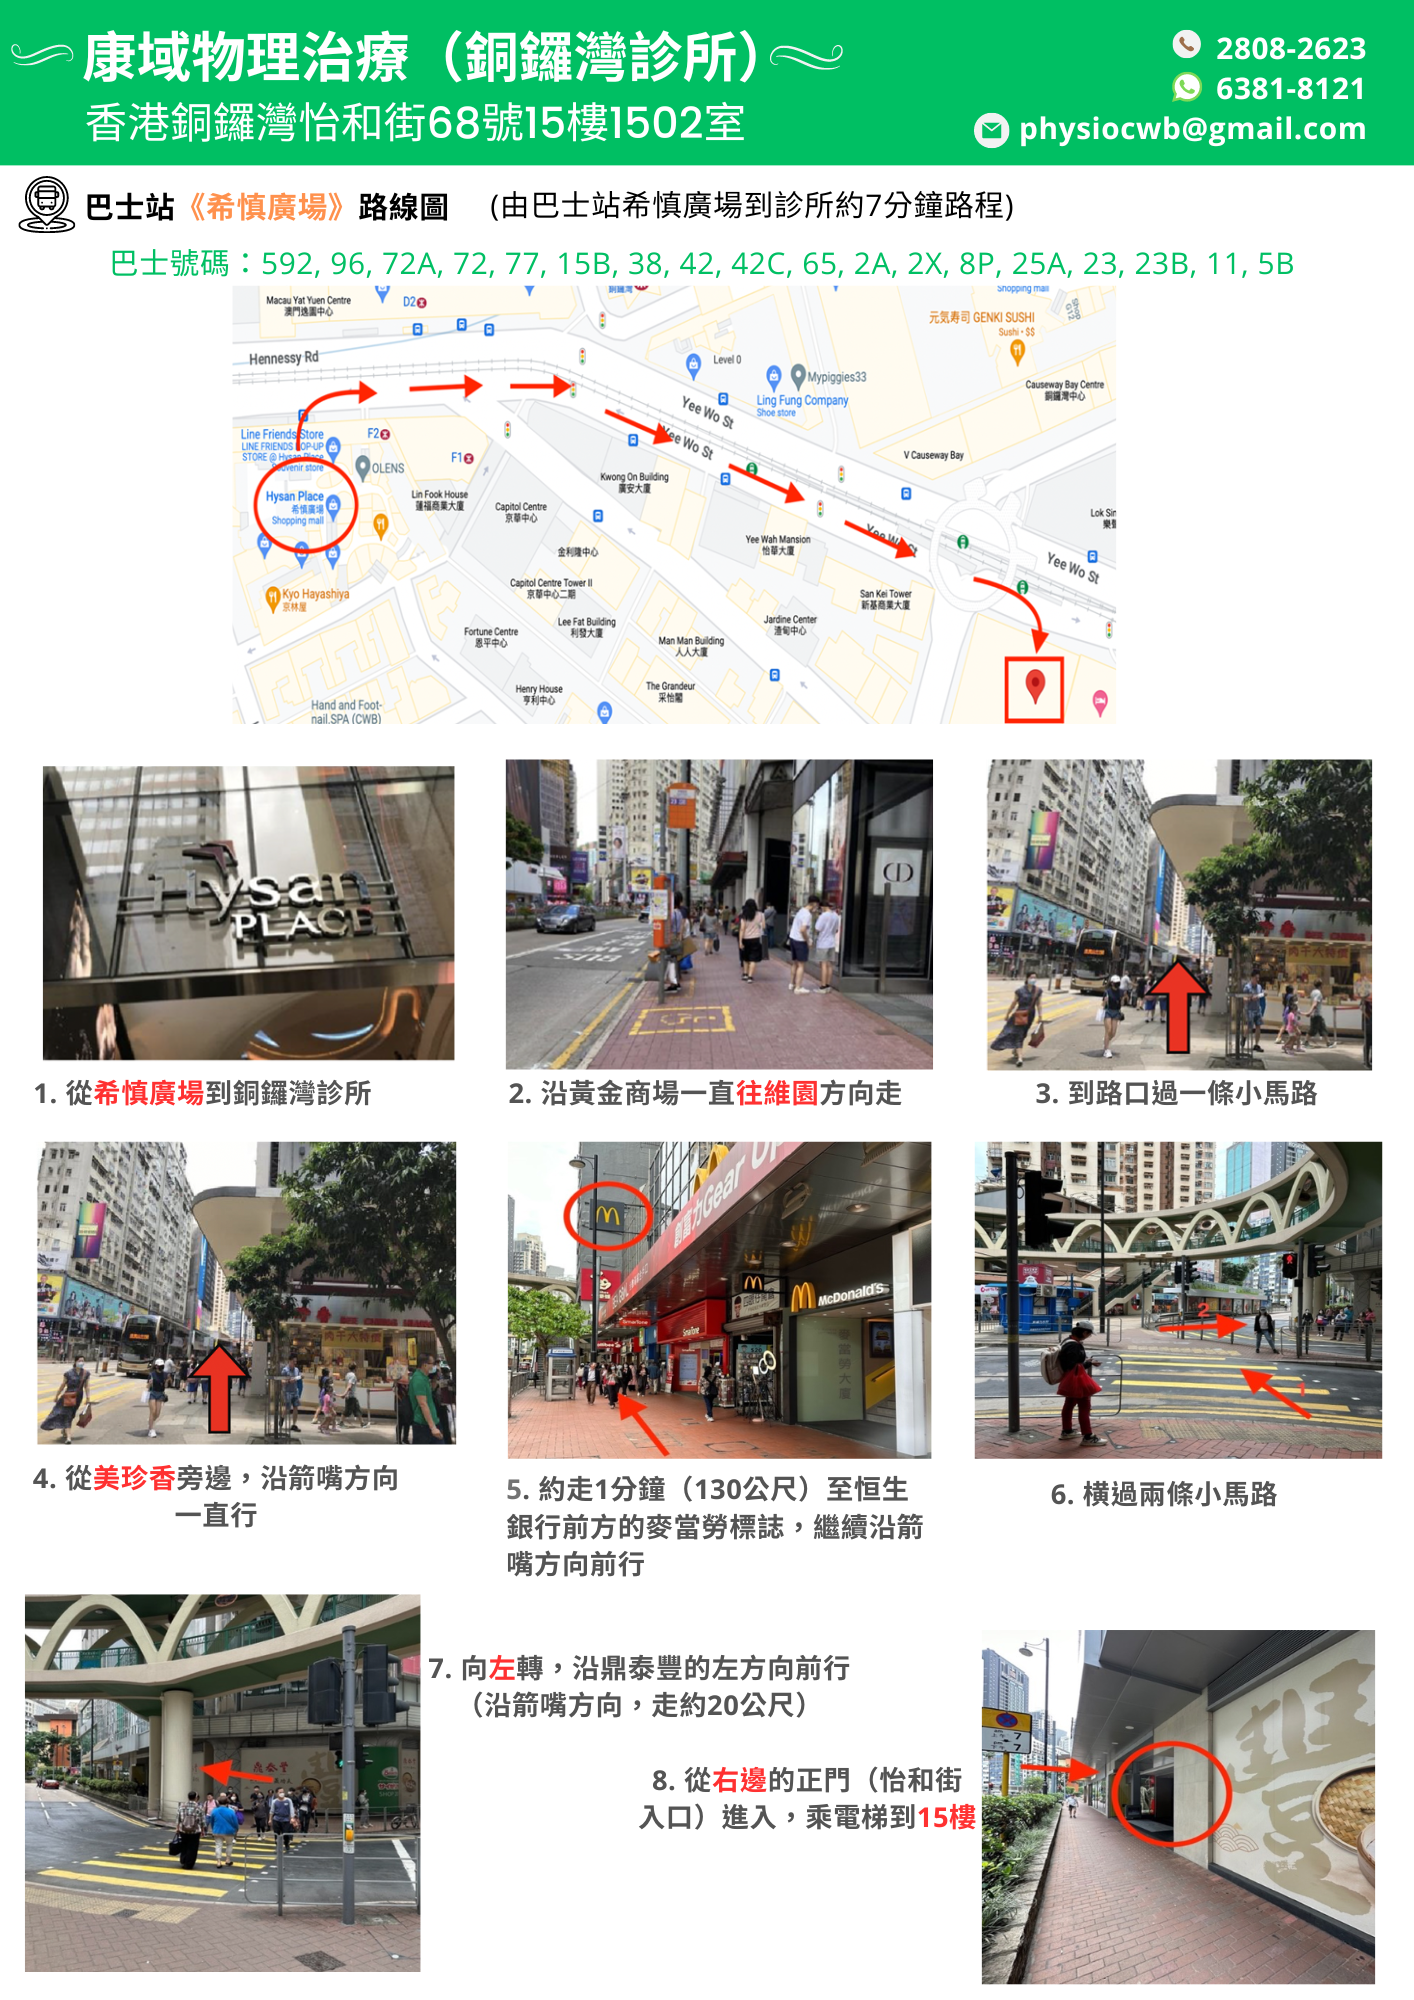 cwb-route-map-bus-chinese.png